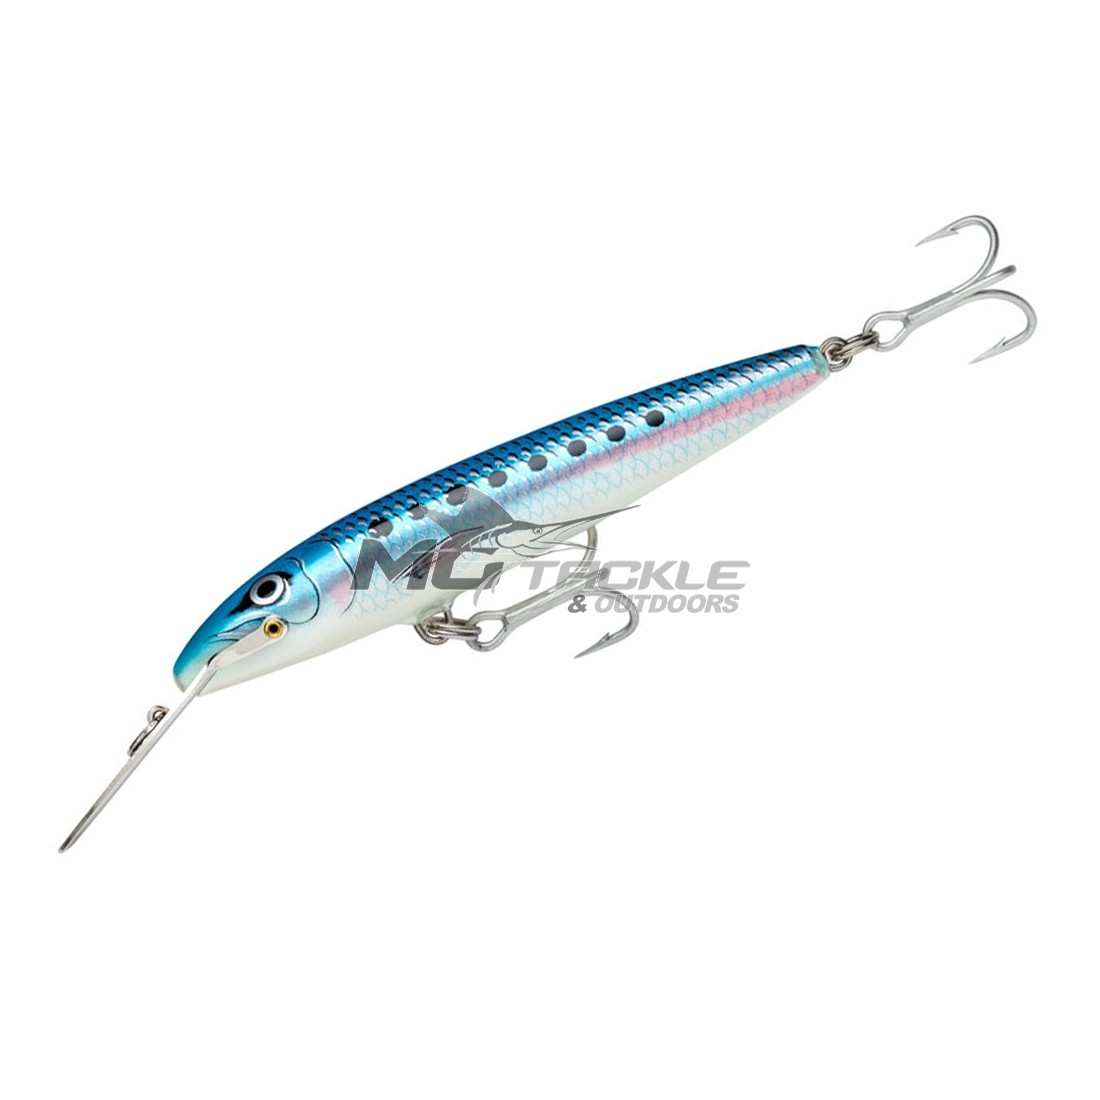 Rapala Magnum Countdown Sinking - Clearance